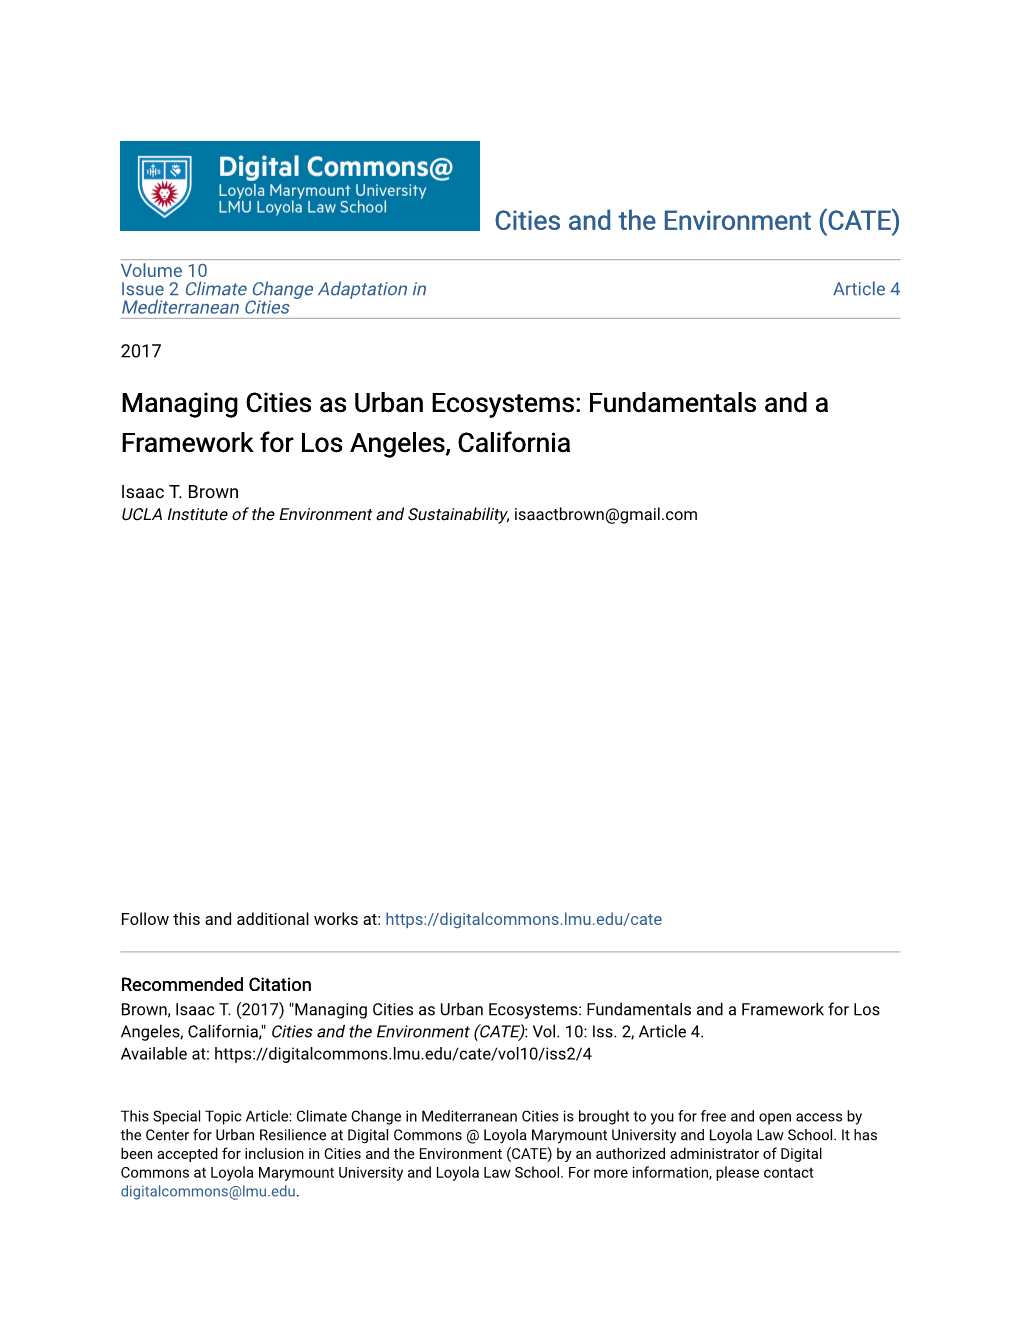 Managing Cities As Urban Ecosystems: Fundamentals and a Framework for Los Angeles, California